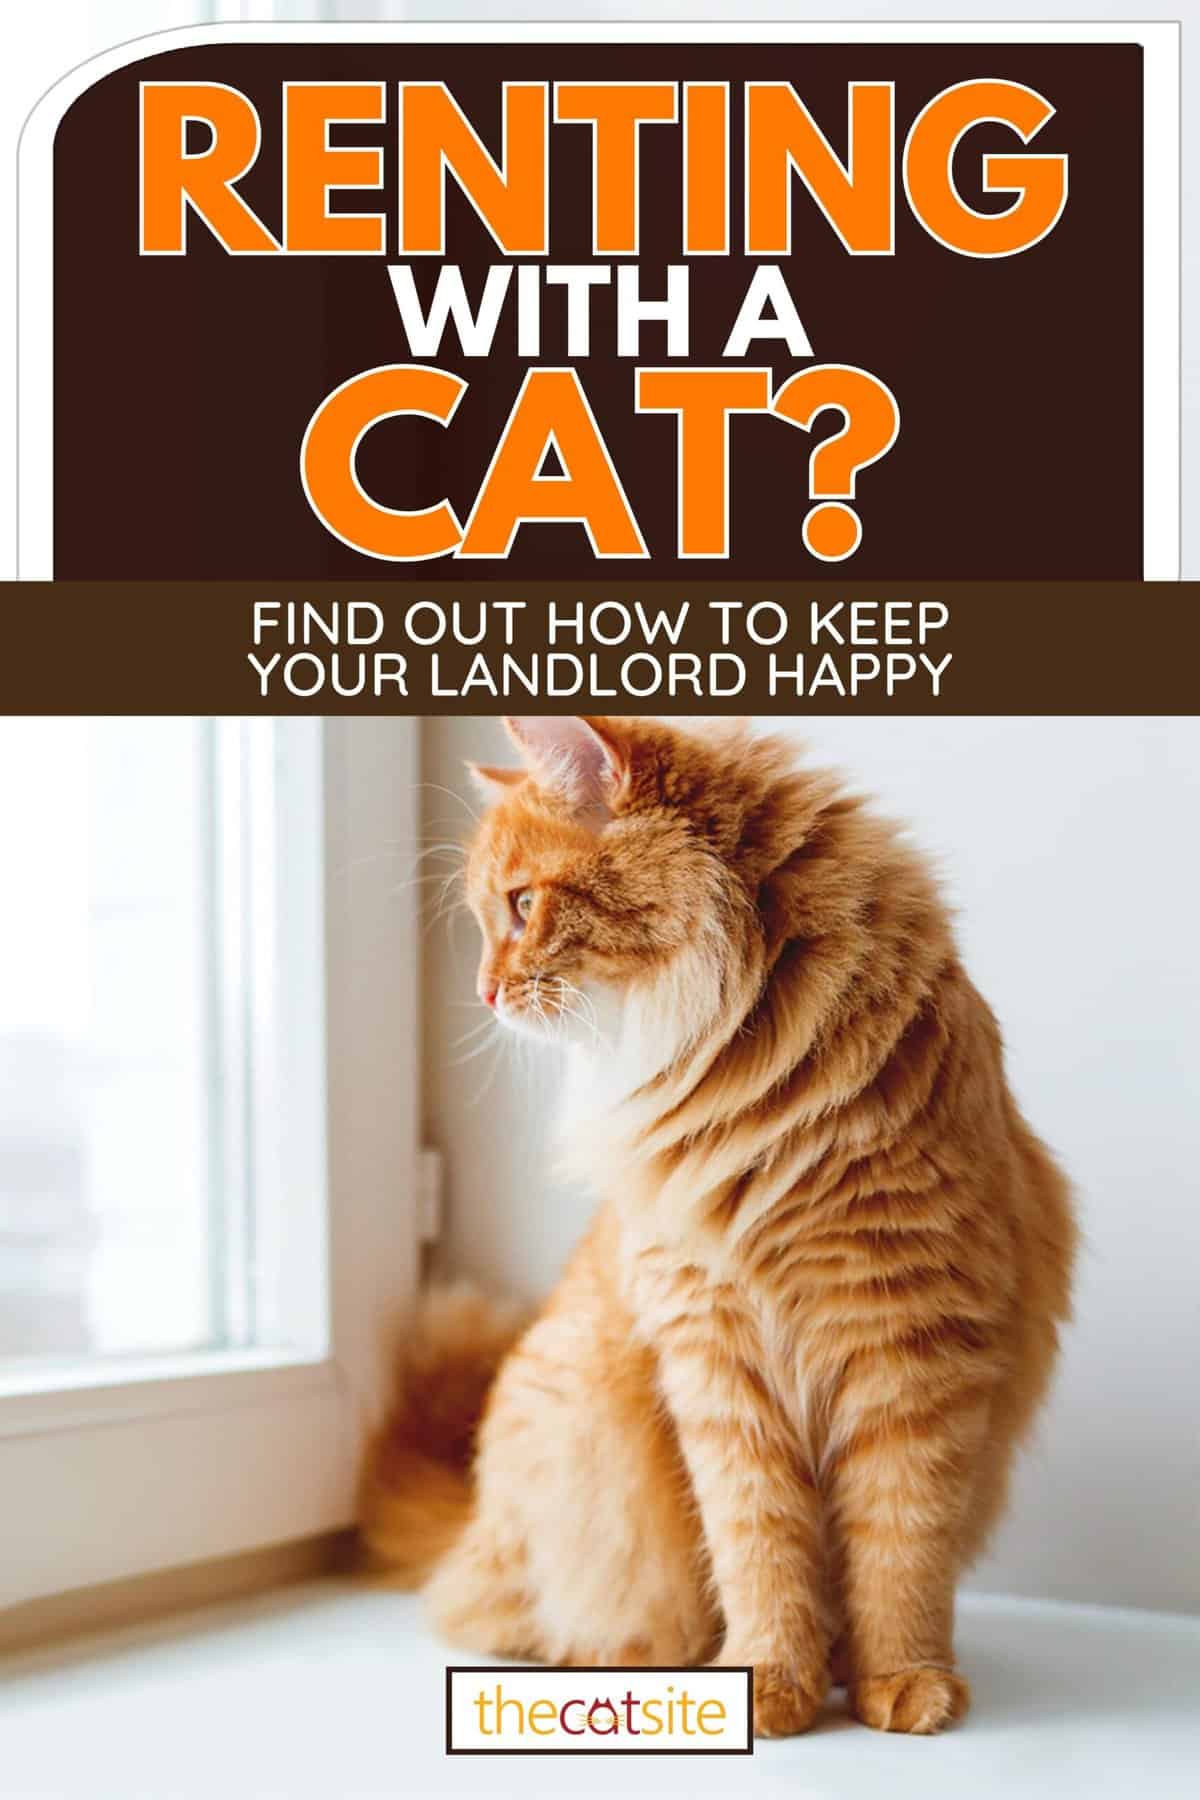 Cute ginger cat siting on window sill and waiting for something, Renting With A Cat? Find Out How To Keep Your Landlord Happy